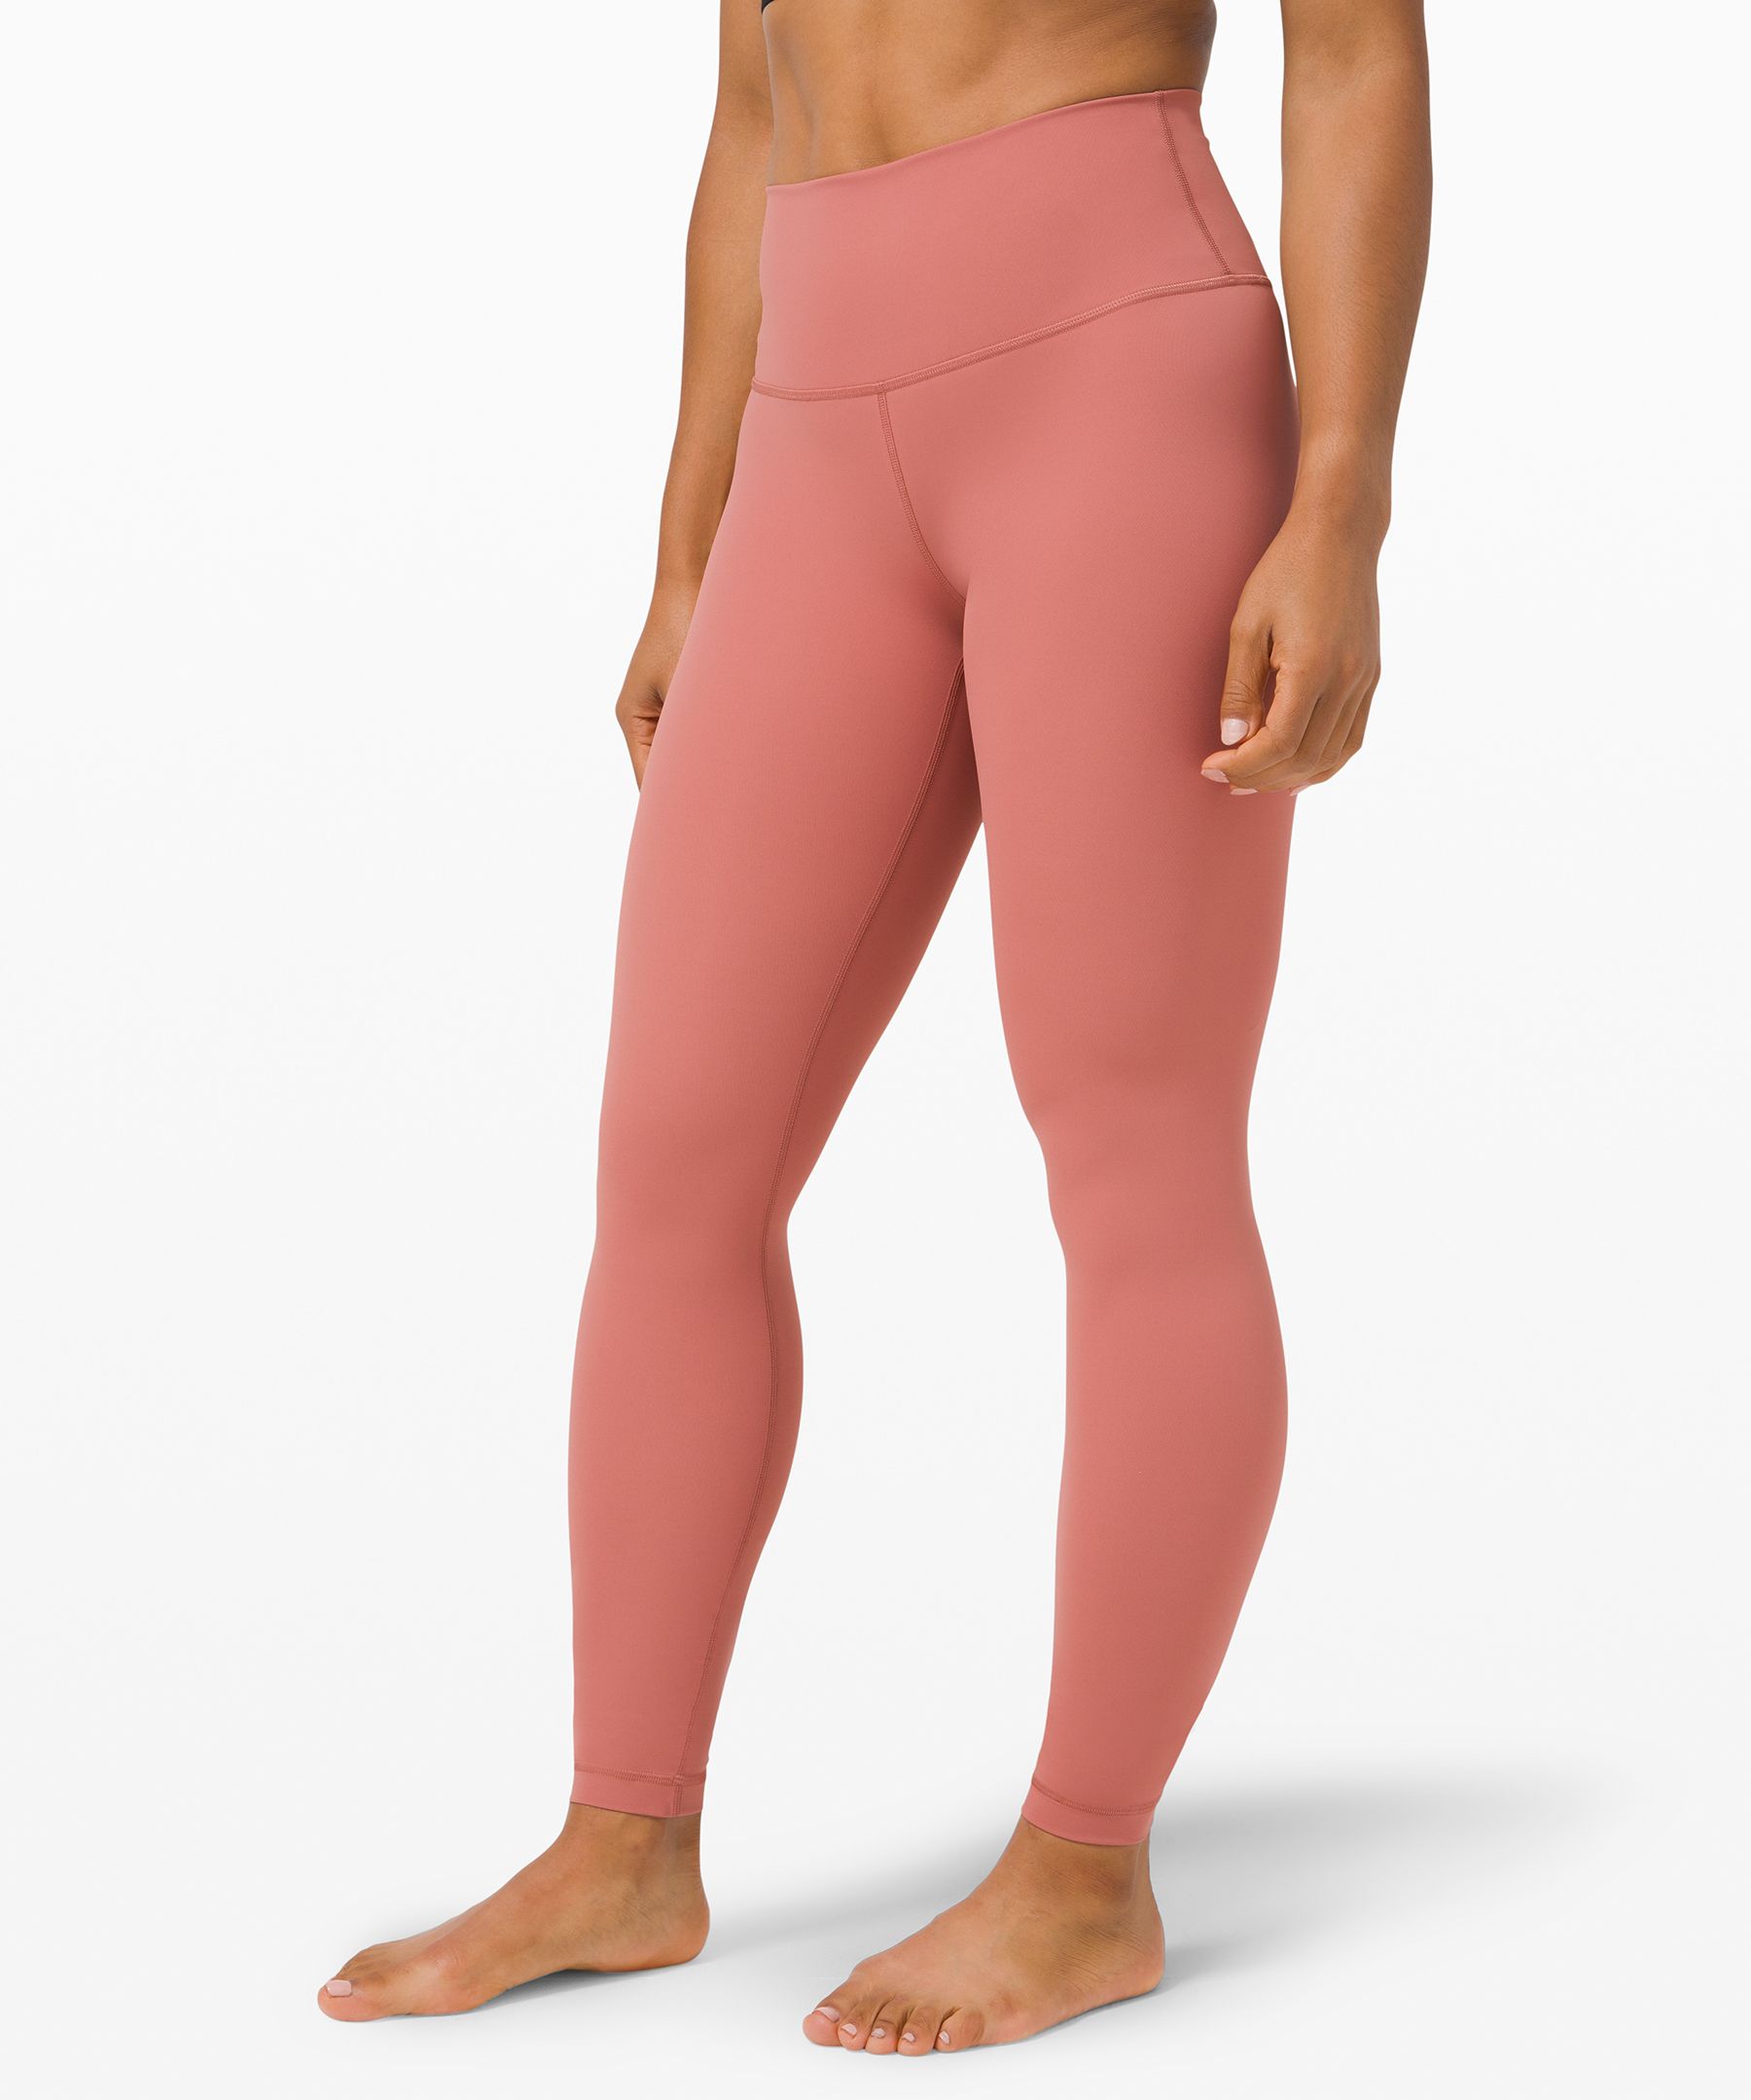 Lululemon Wunder Under High-rise Tights 28 Full-on Luxtreme In Brier Rose